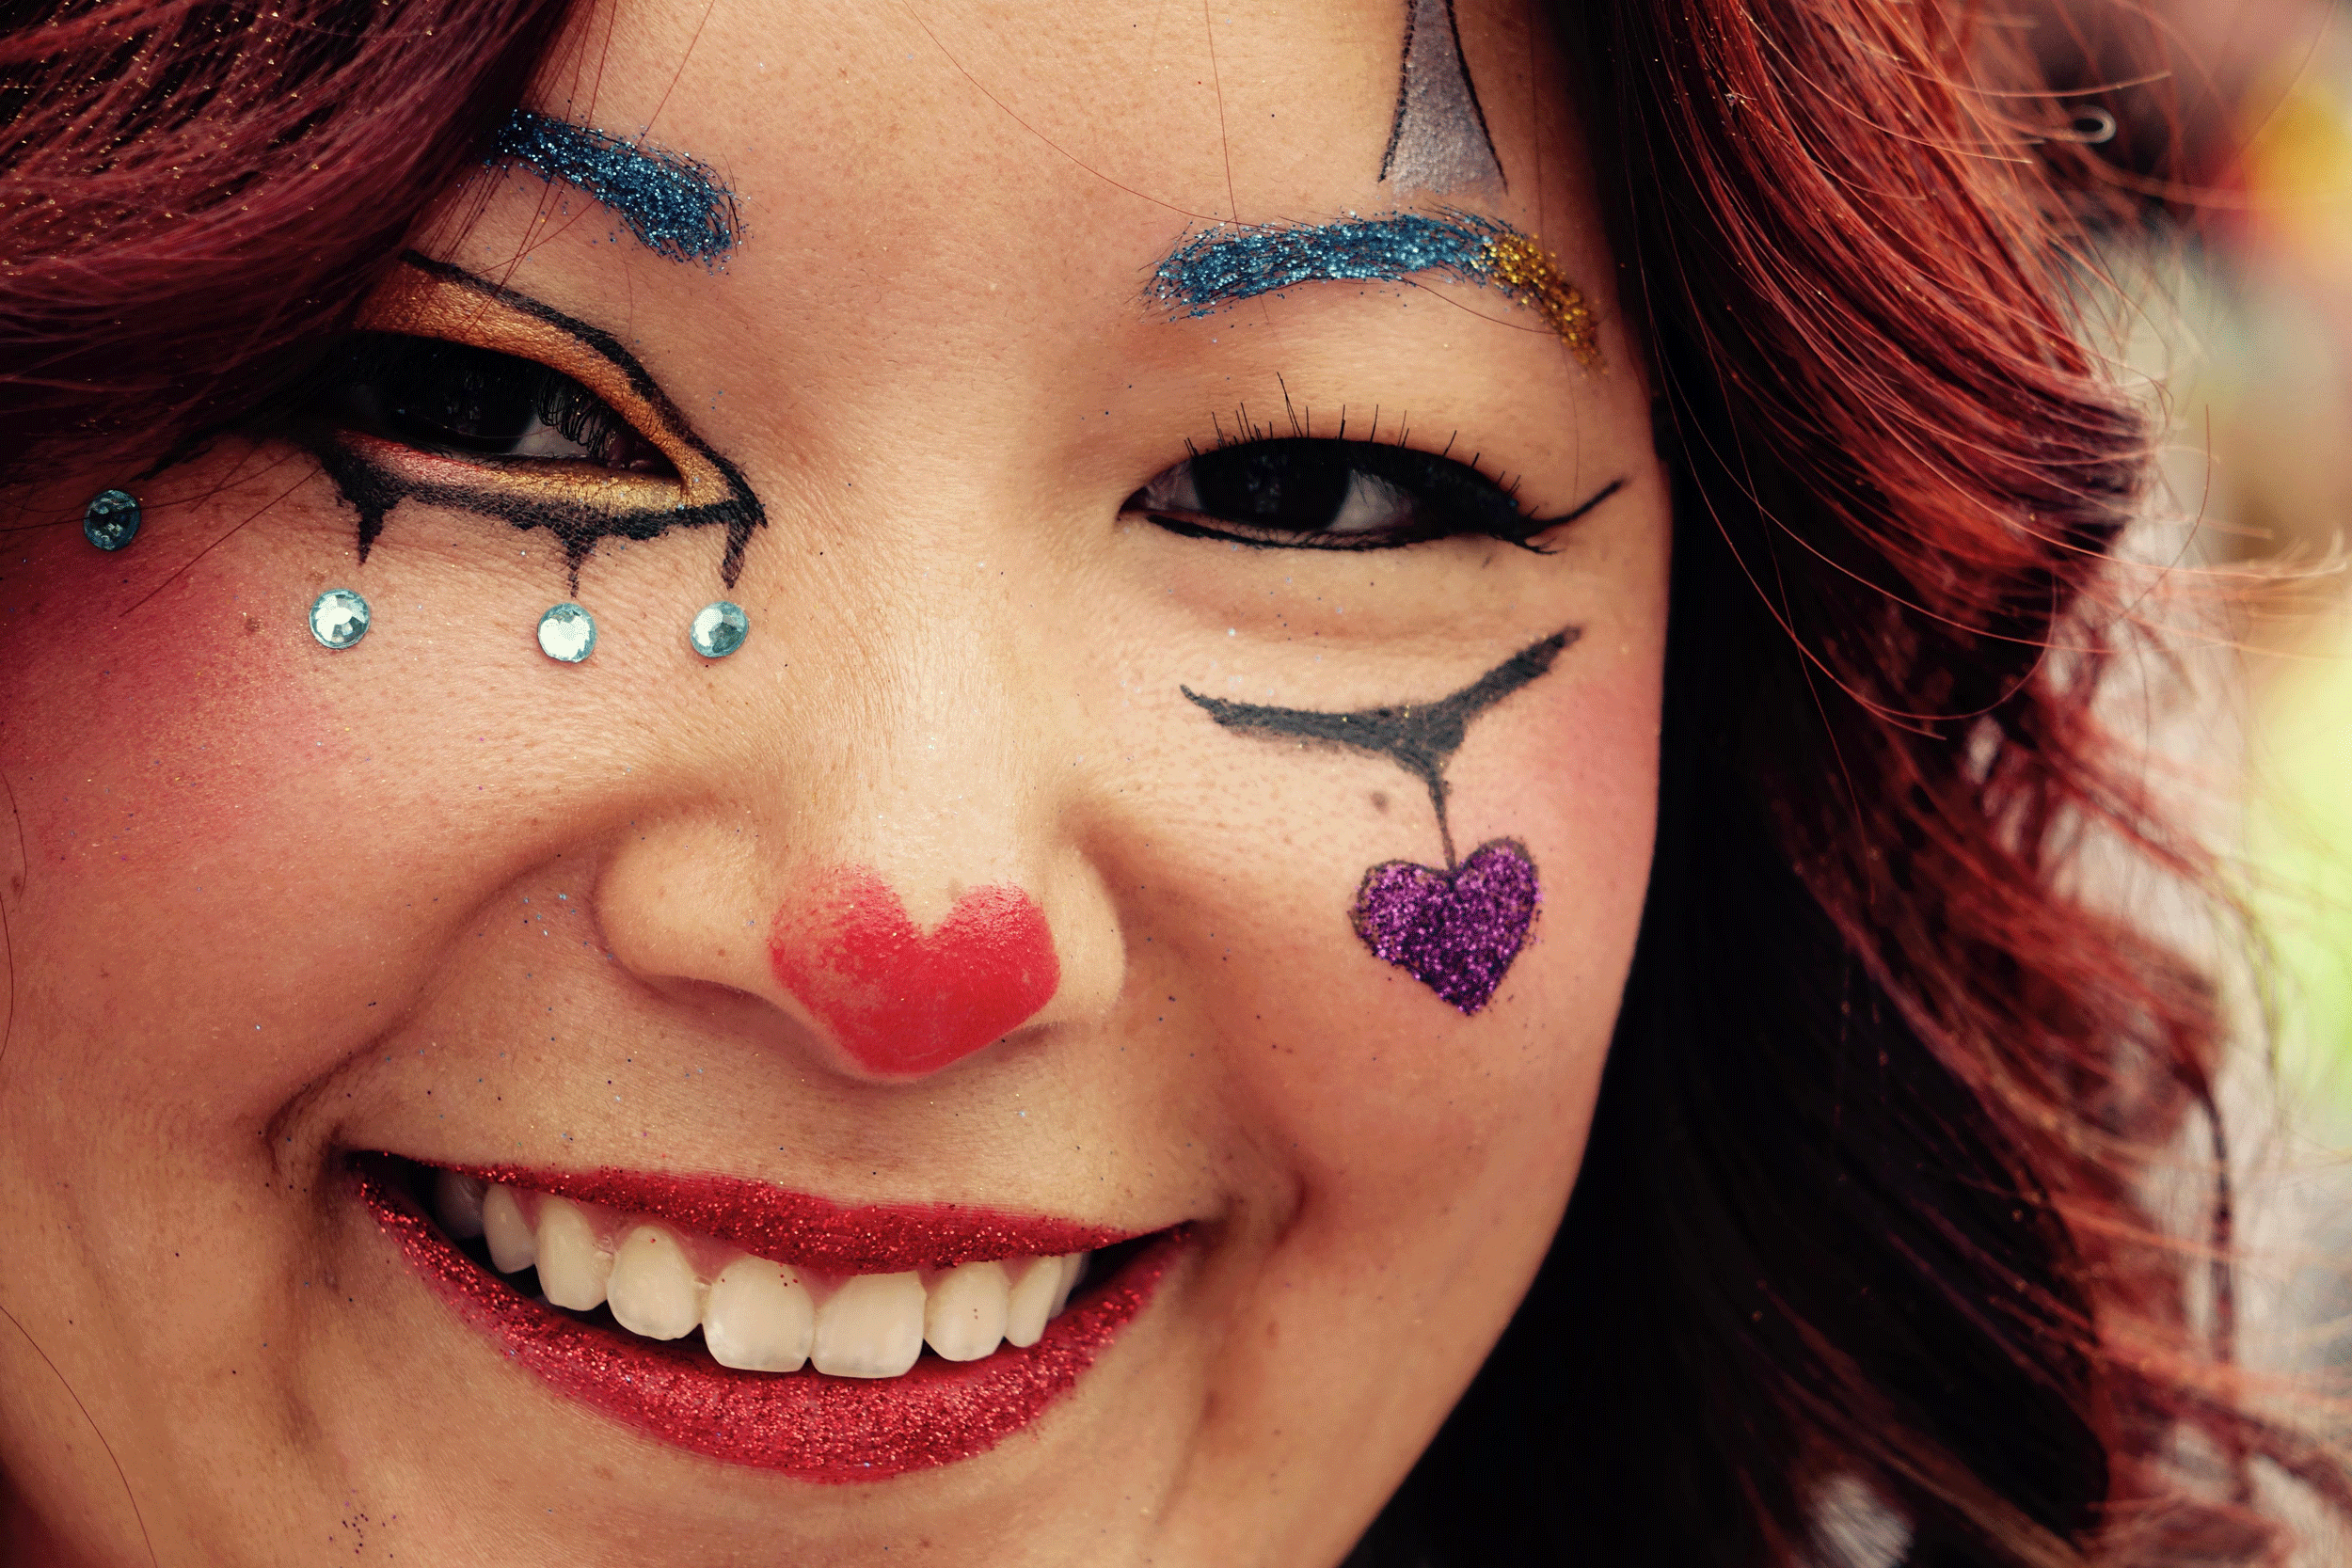 Woman with sparkly face paint smiling